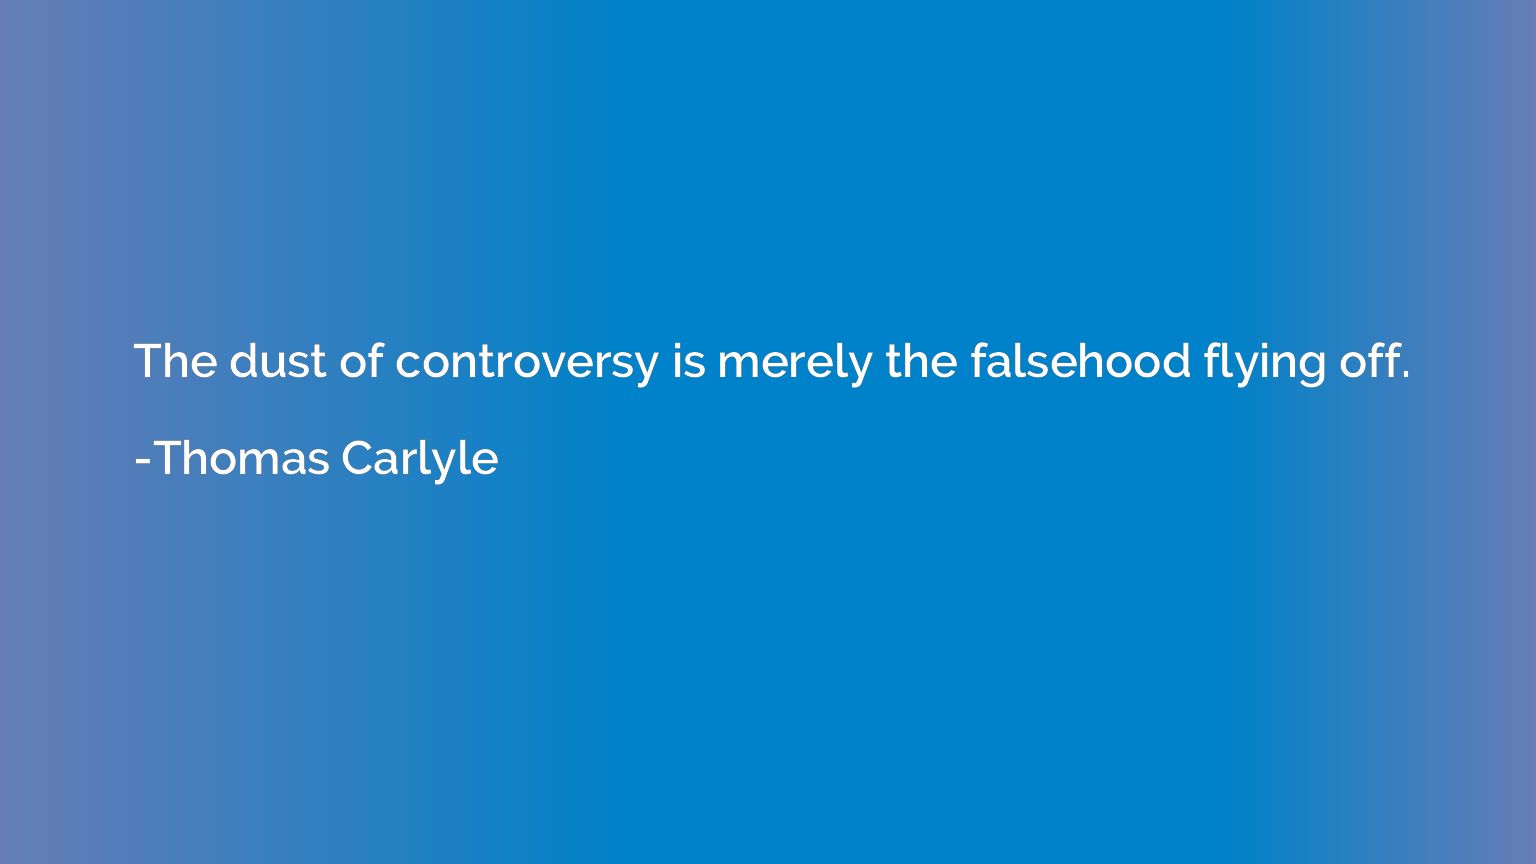 The dust of controversy is merely the falsehood flying off.